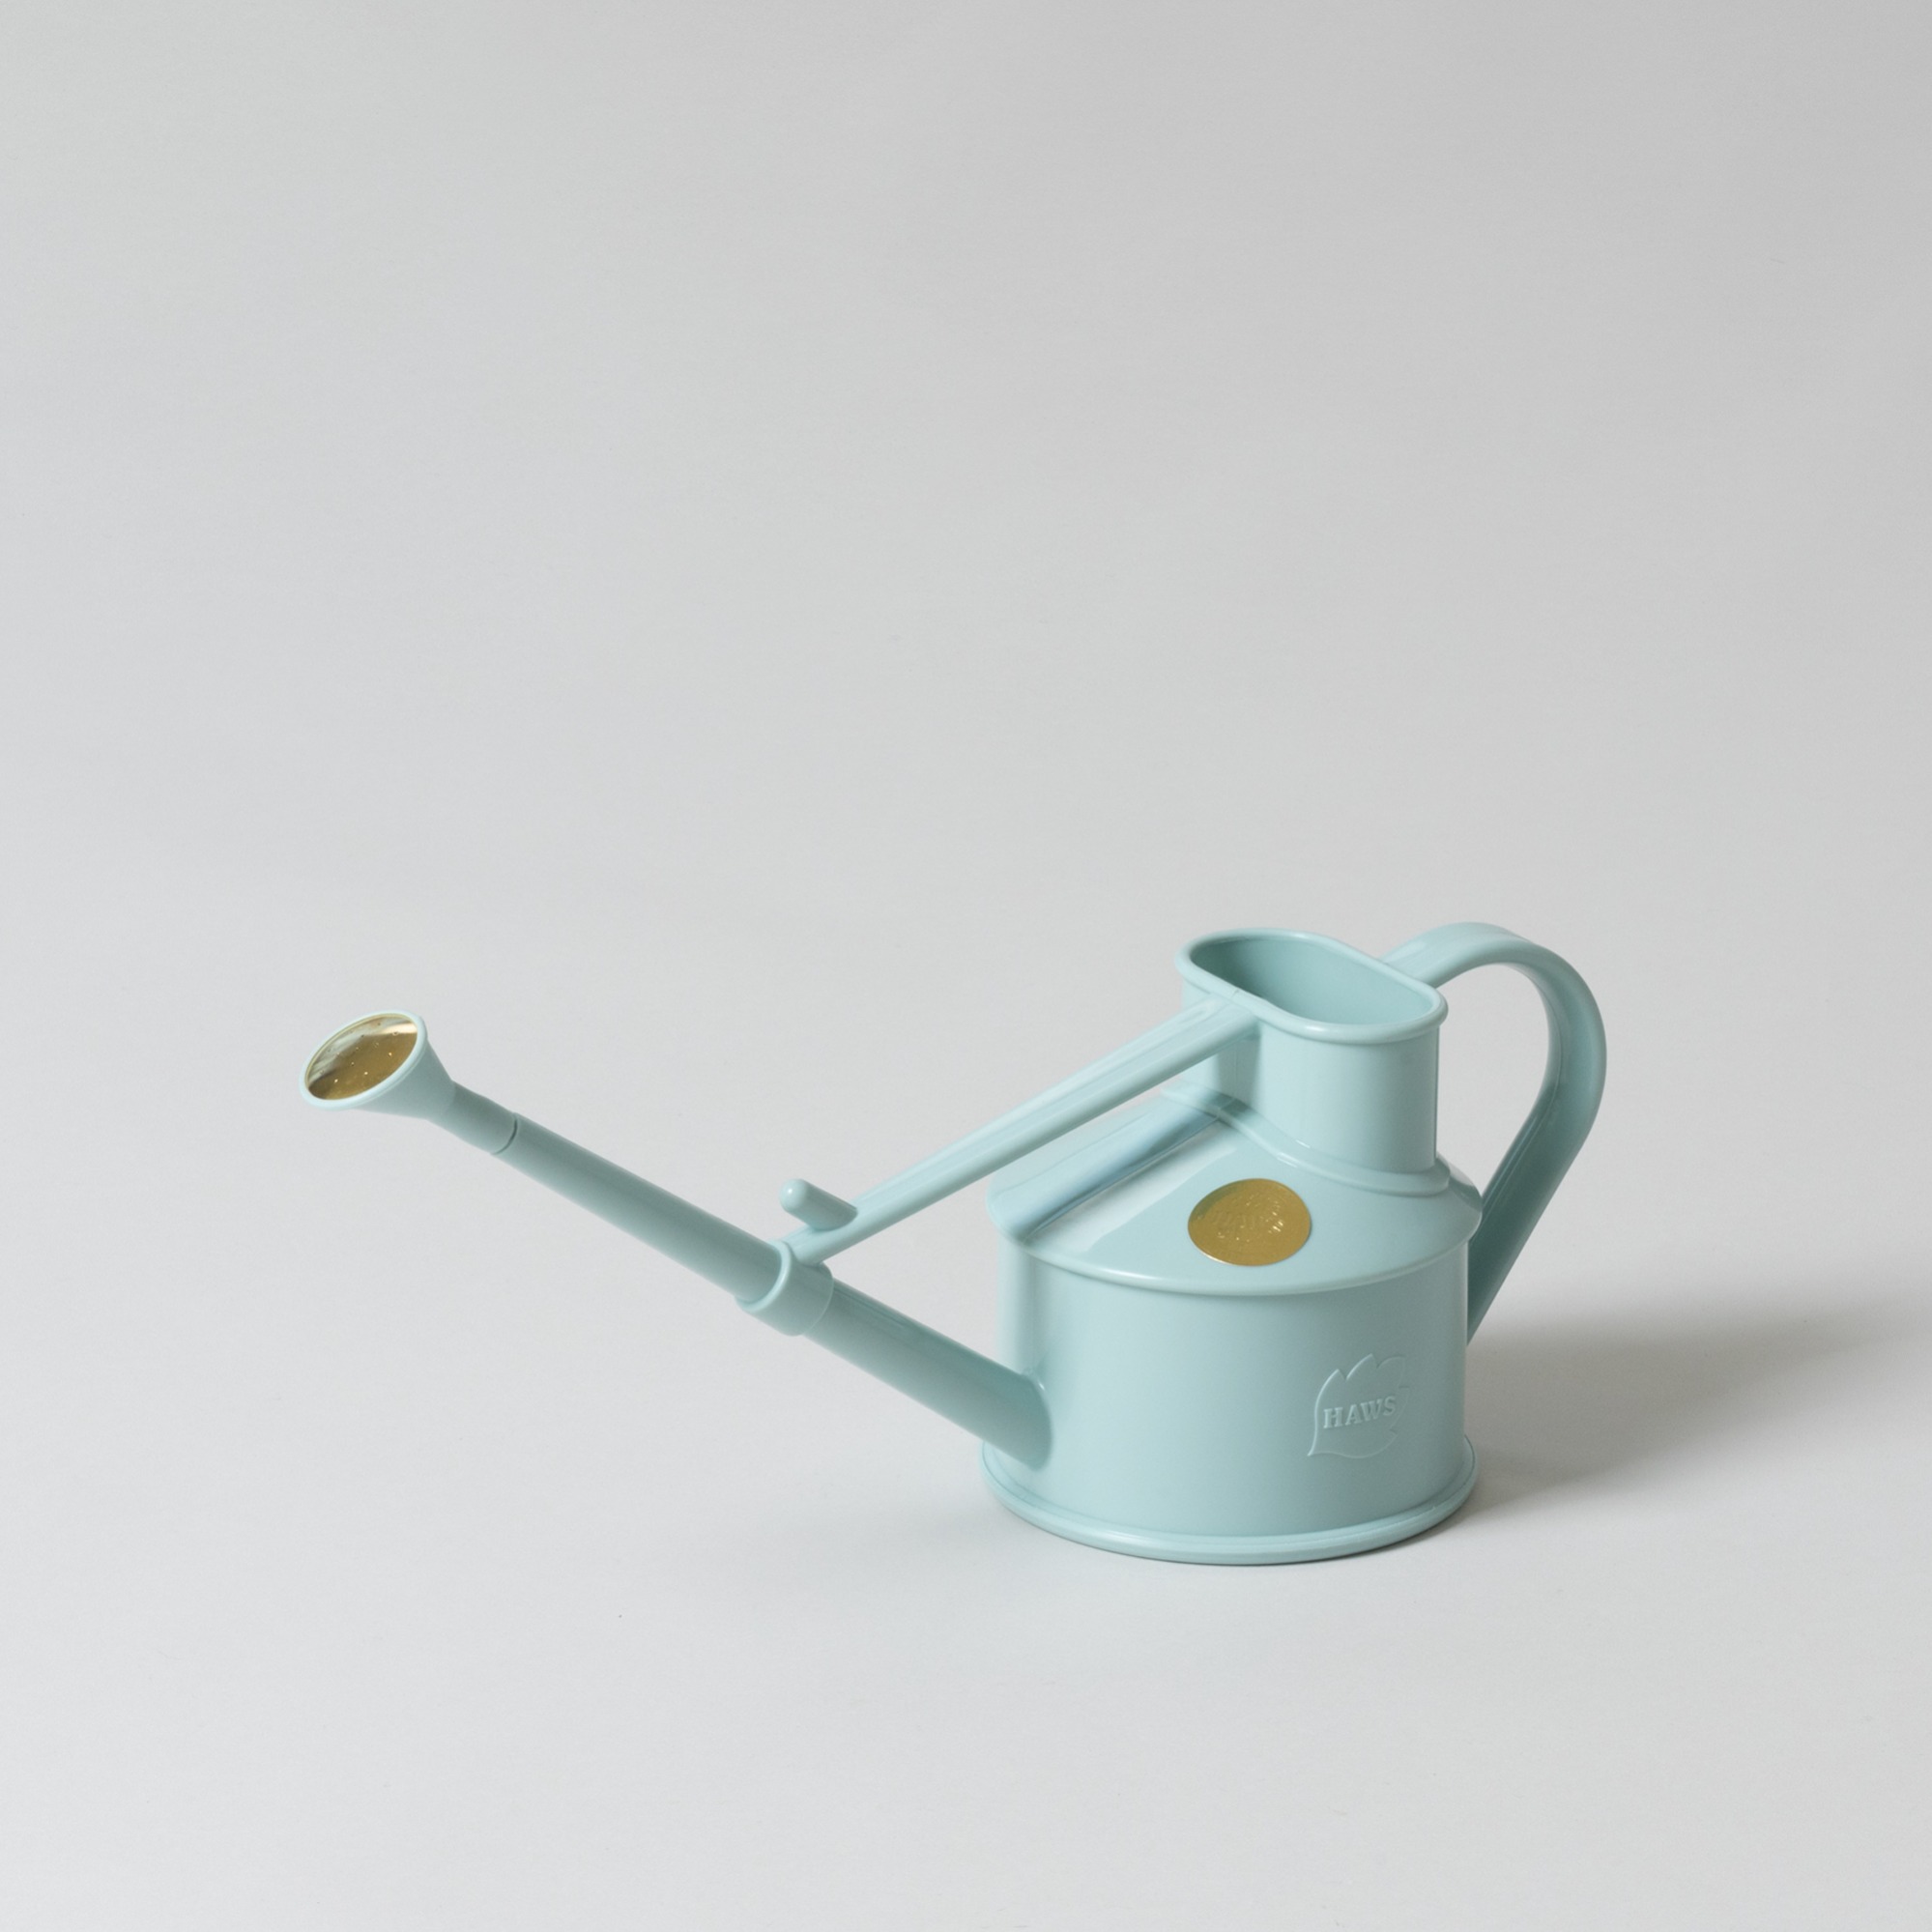 HAWS 0.7L Plastic Watering Can - Egg Blue